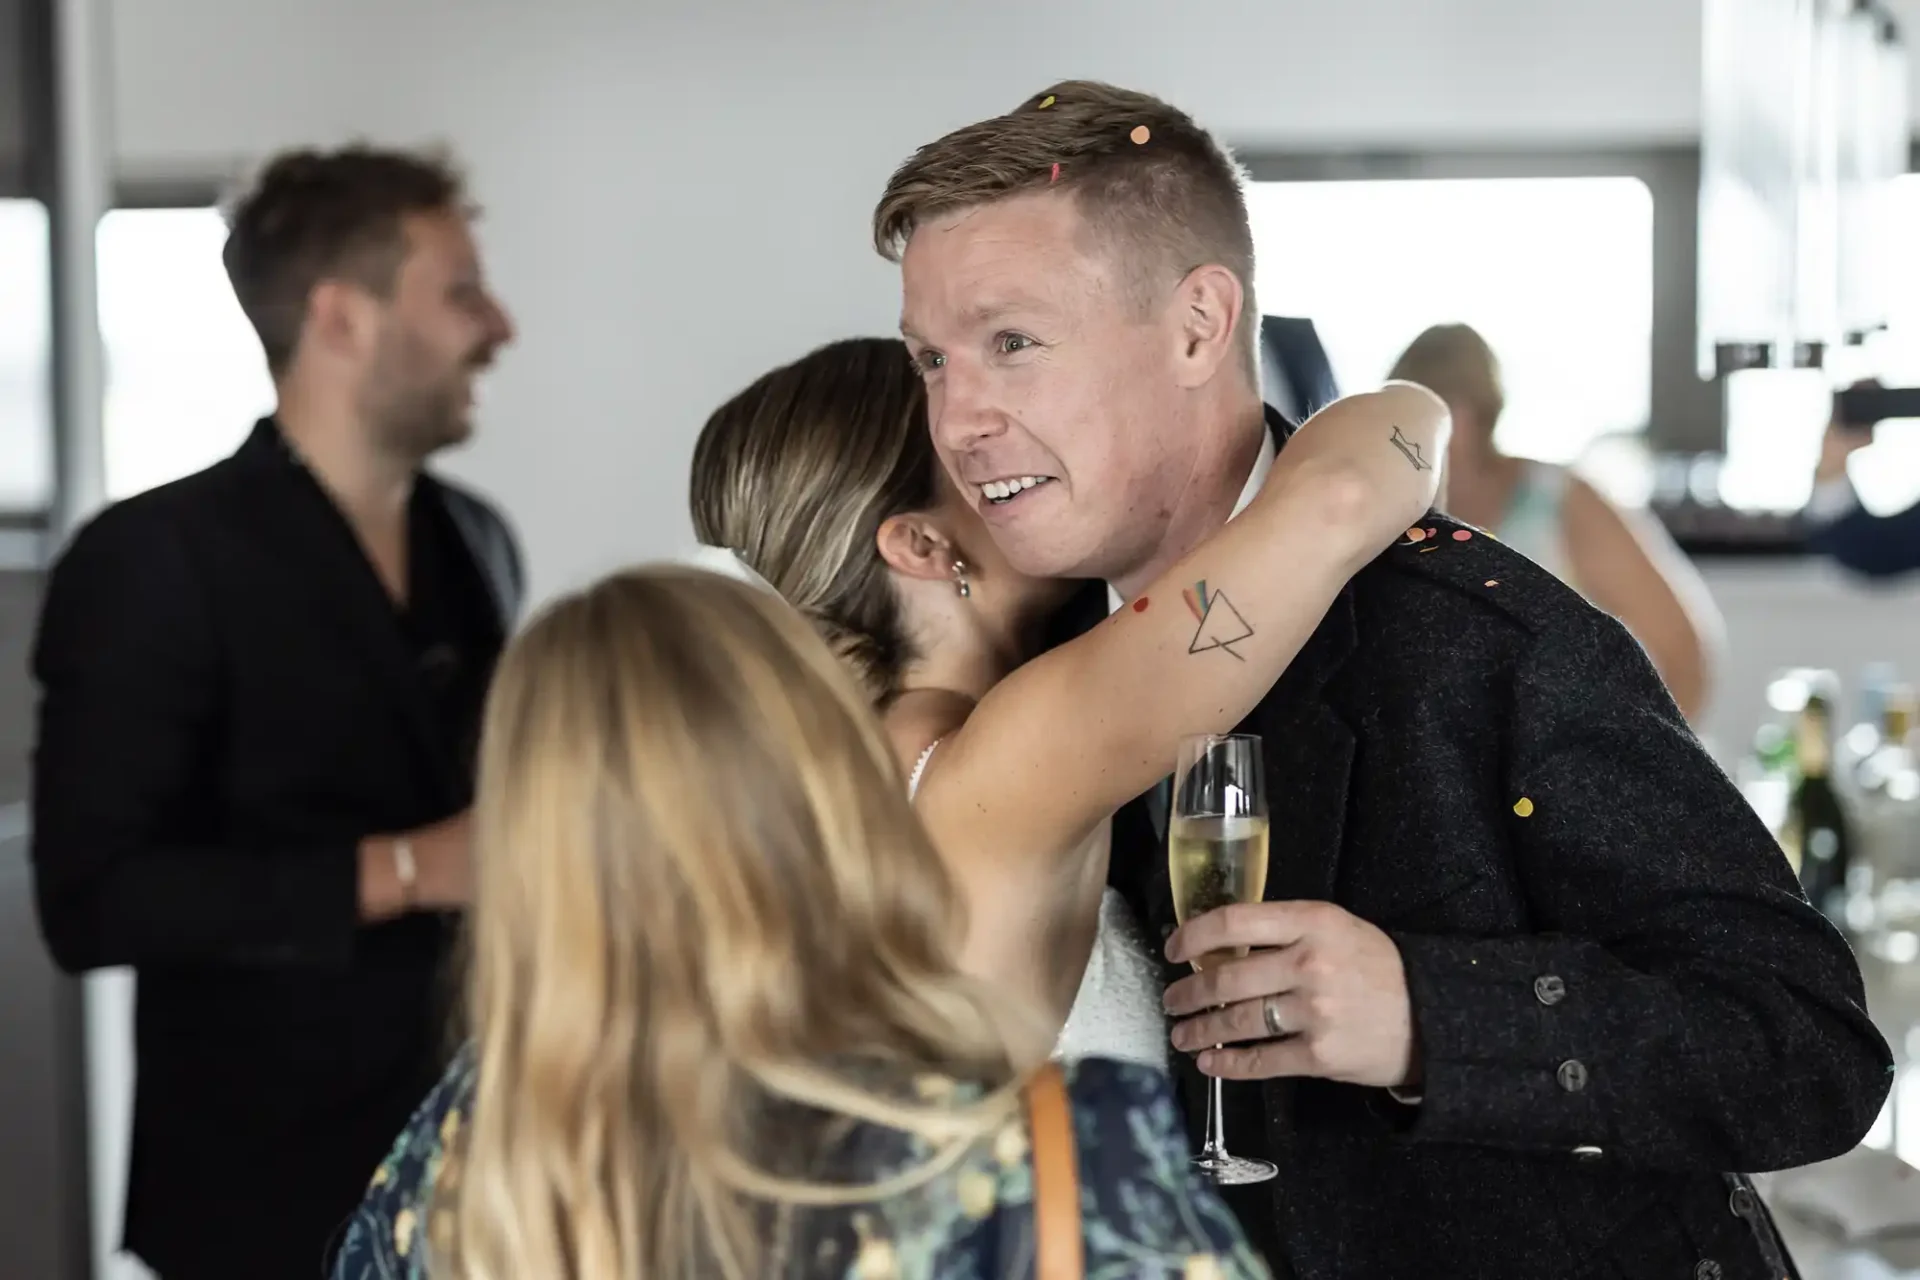 Man with a tattoo on his arm holding a champagne glass while greeting guests at a social gathering indoors.